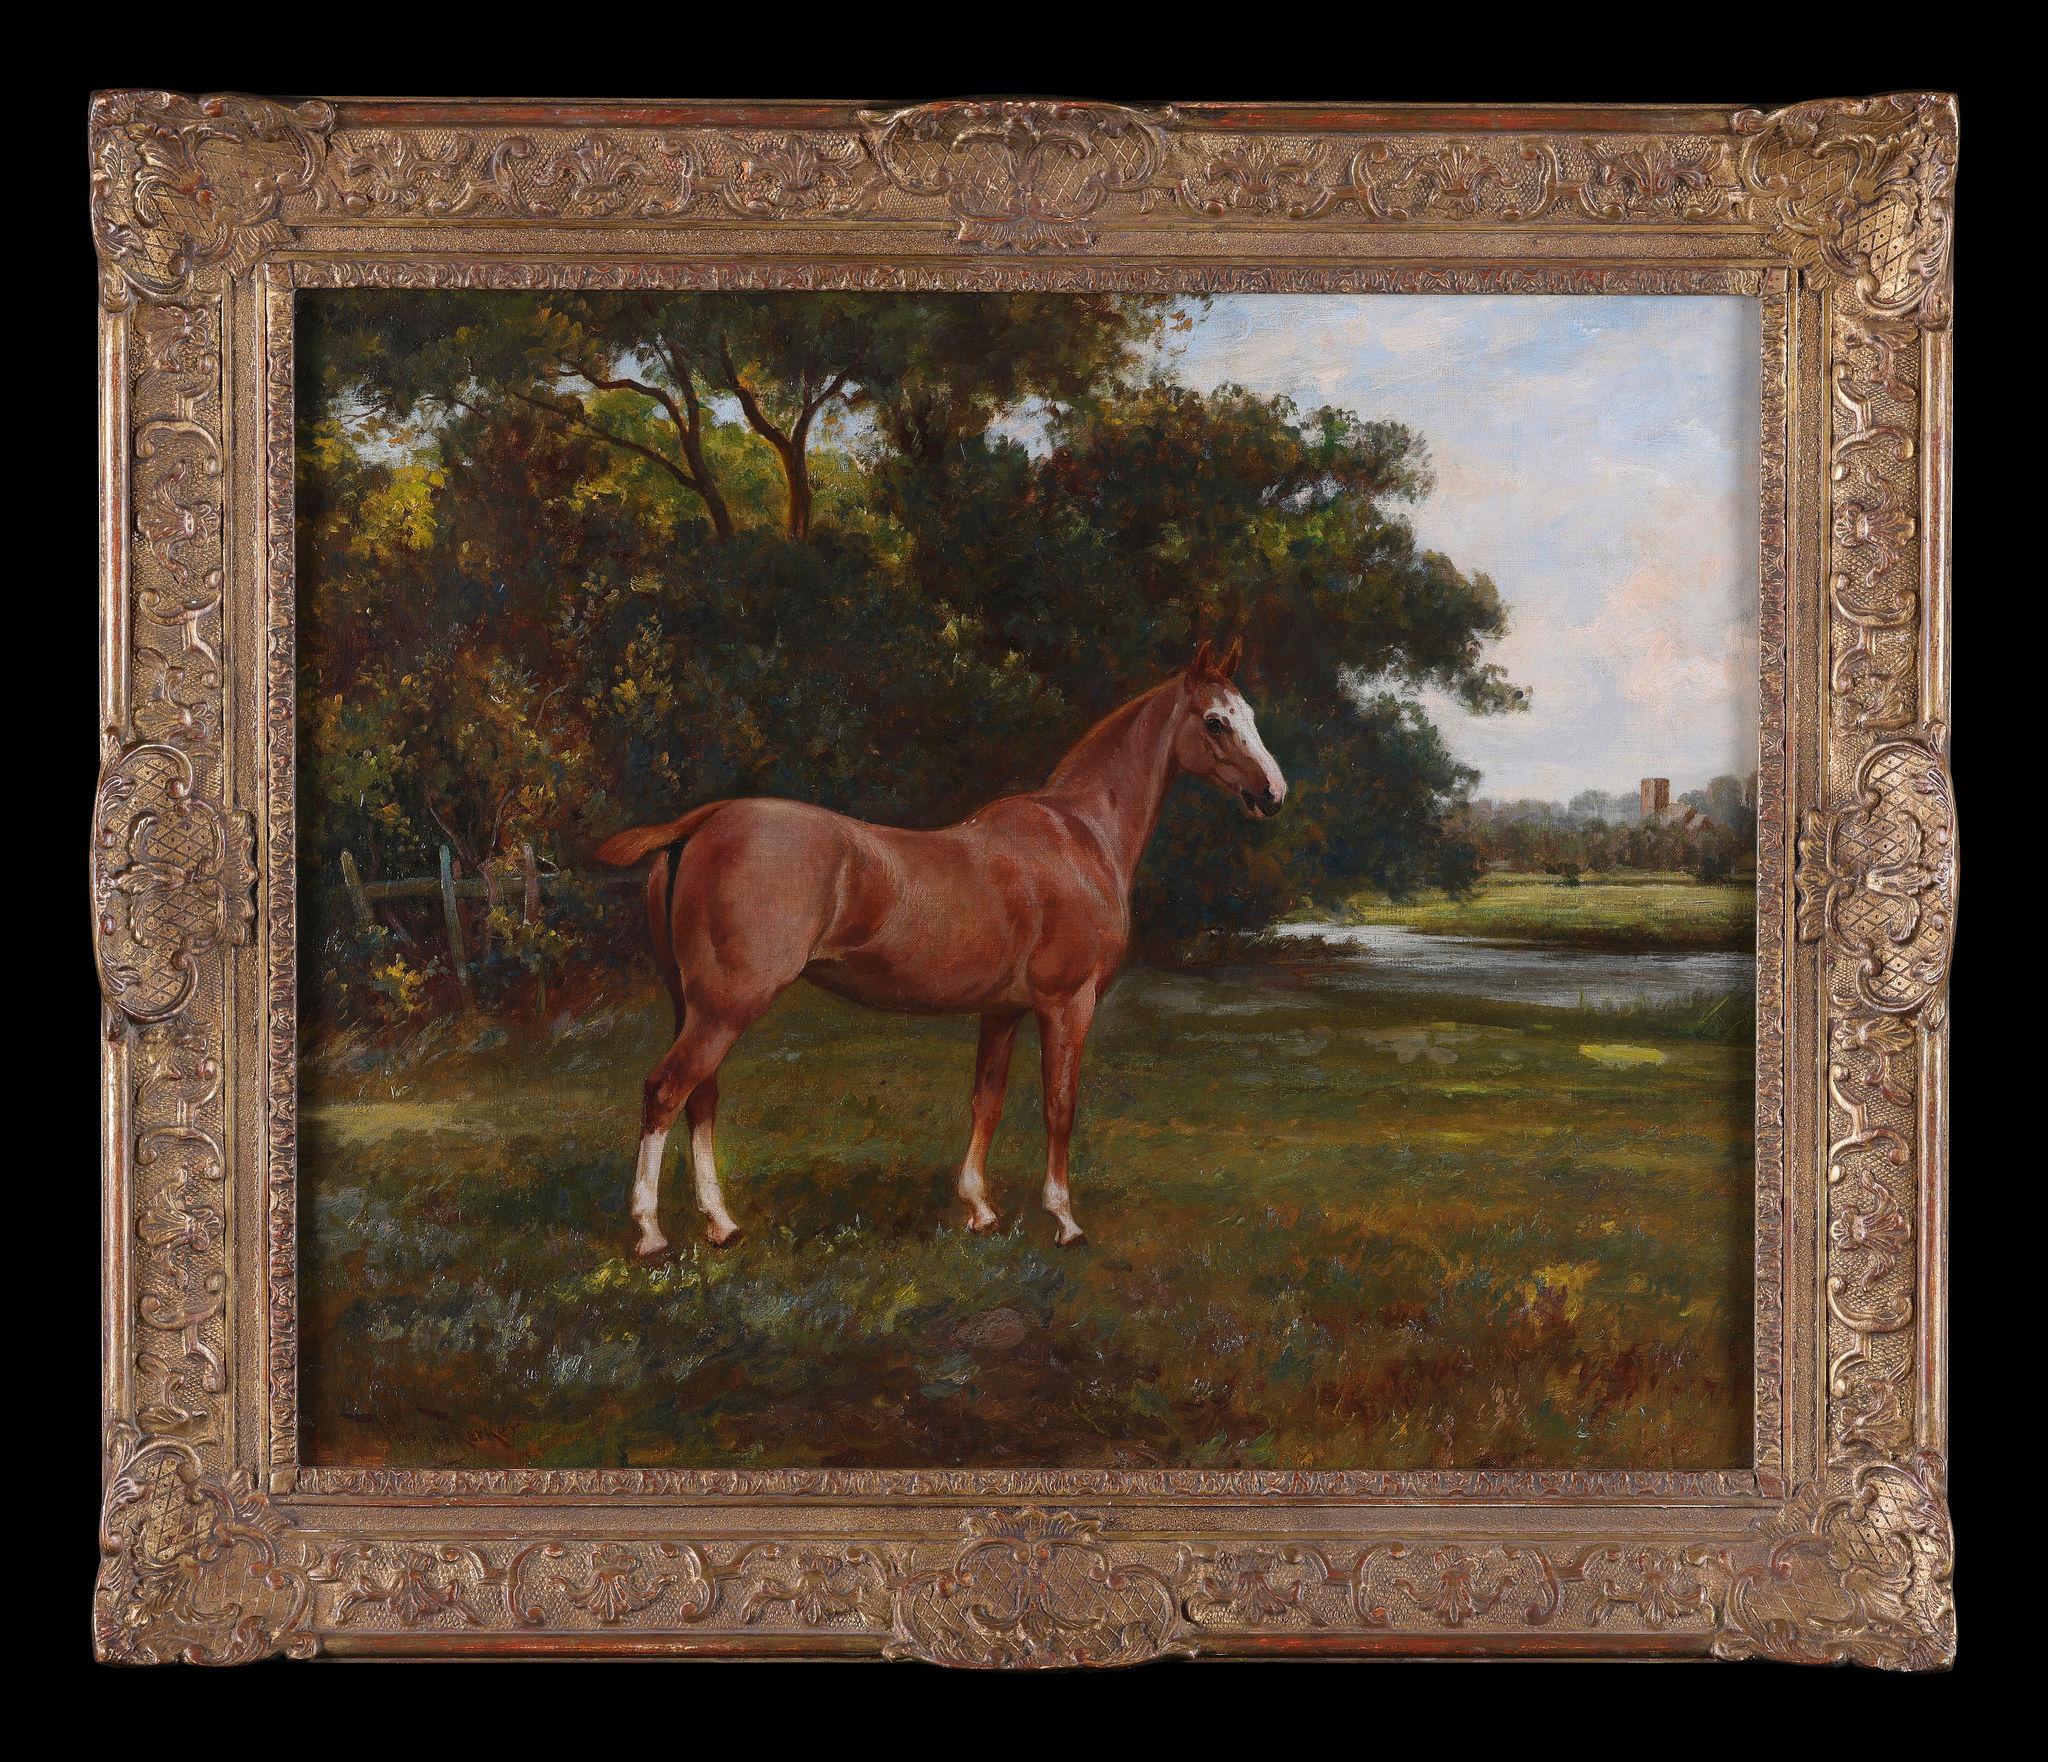 Wright Barker Landscape Painting - A Horse in a Field. Oil on Canvas